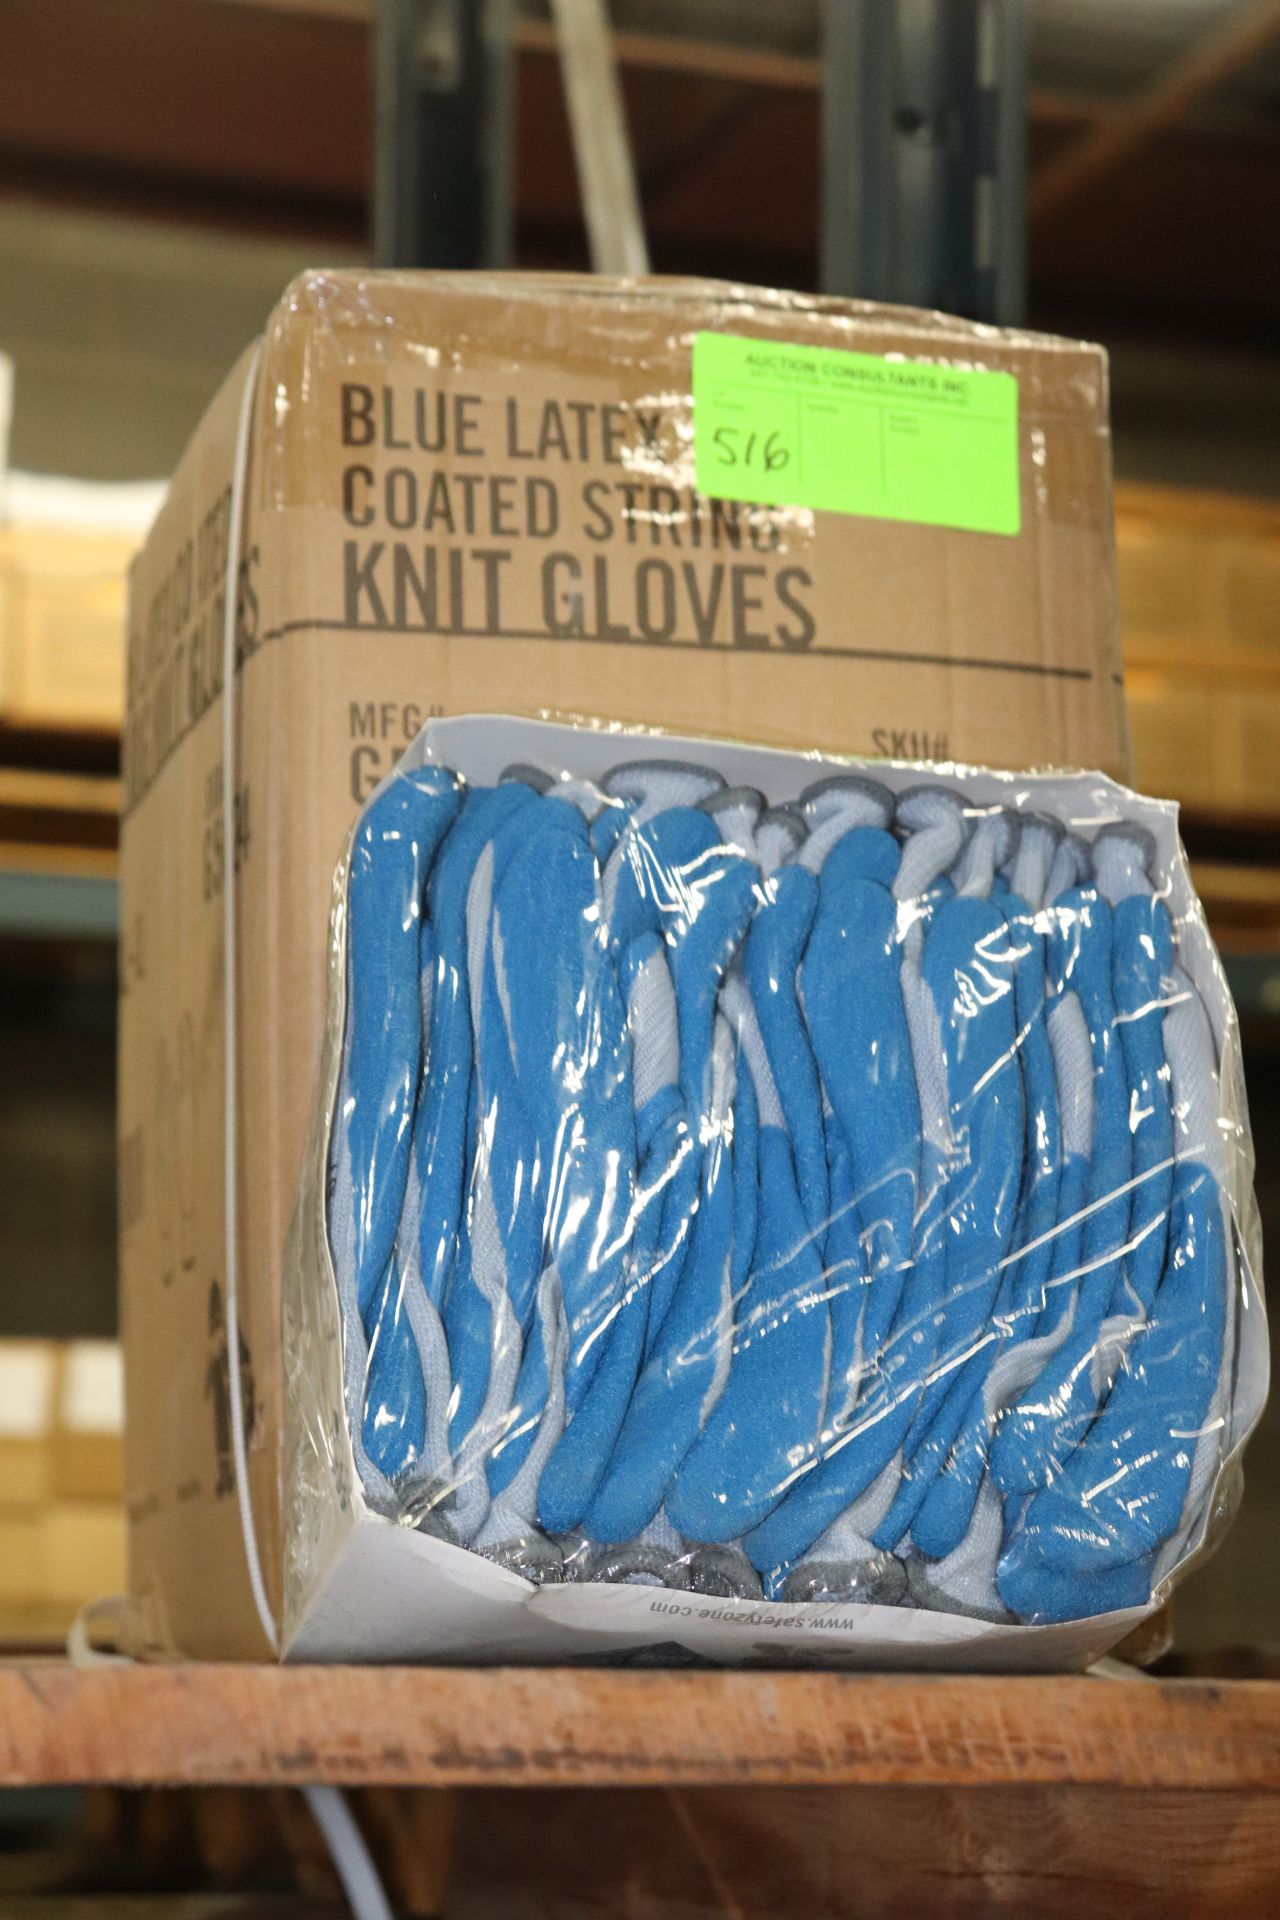 Seventy-eight pairs of blue latex coated string knit gloves